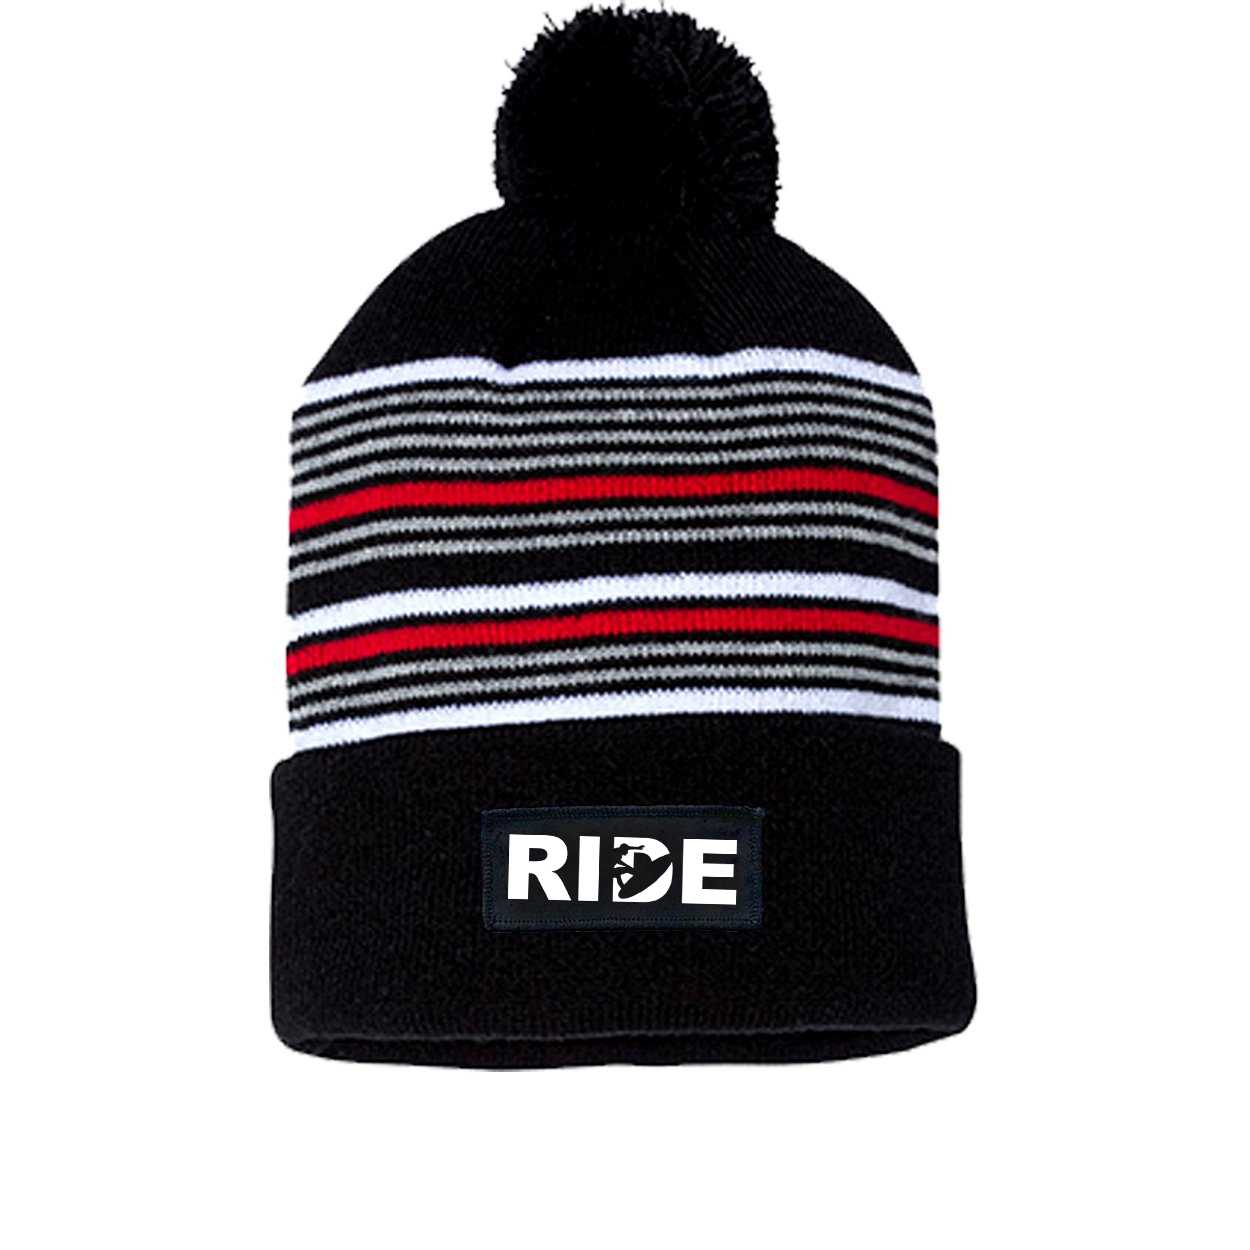 Ride Surf Logo Night Out Woven Patch Roll Up Pom Knit Beanie Black/ White/ Grey/ Red Beanie (White Logo)